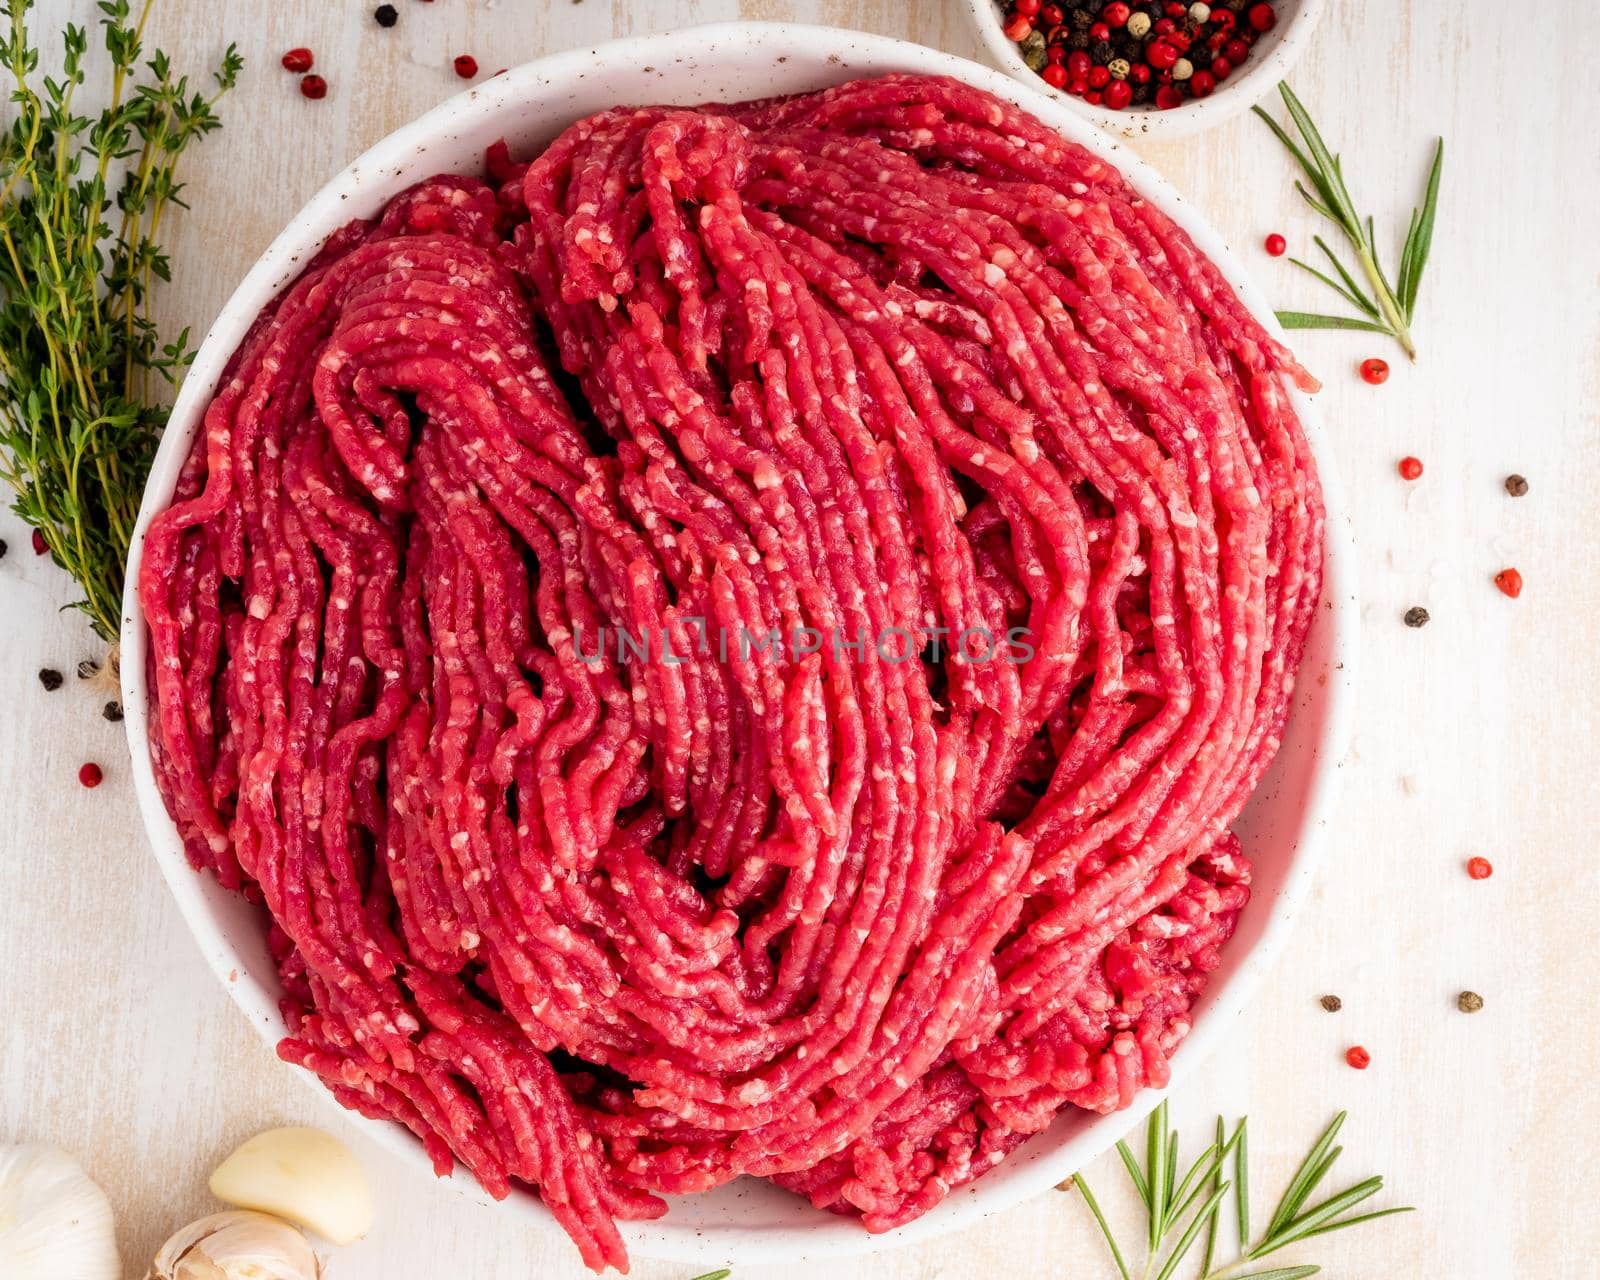 Mince beef, ground meat with ingredients for cooking on white wooden rustic table, top view, close up